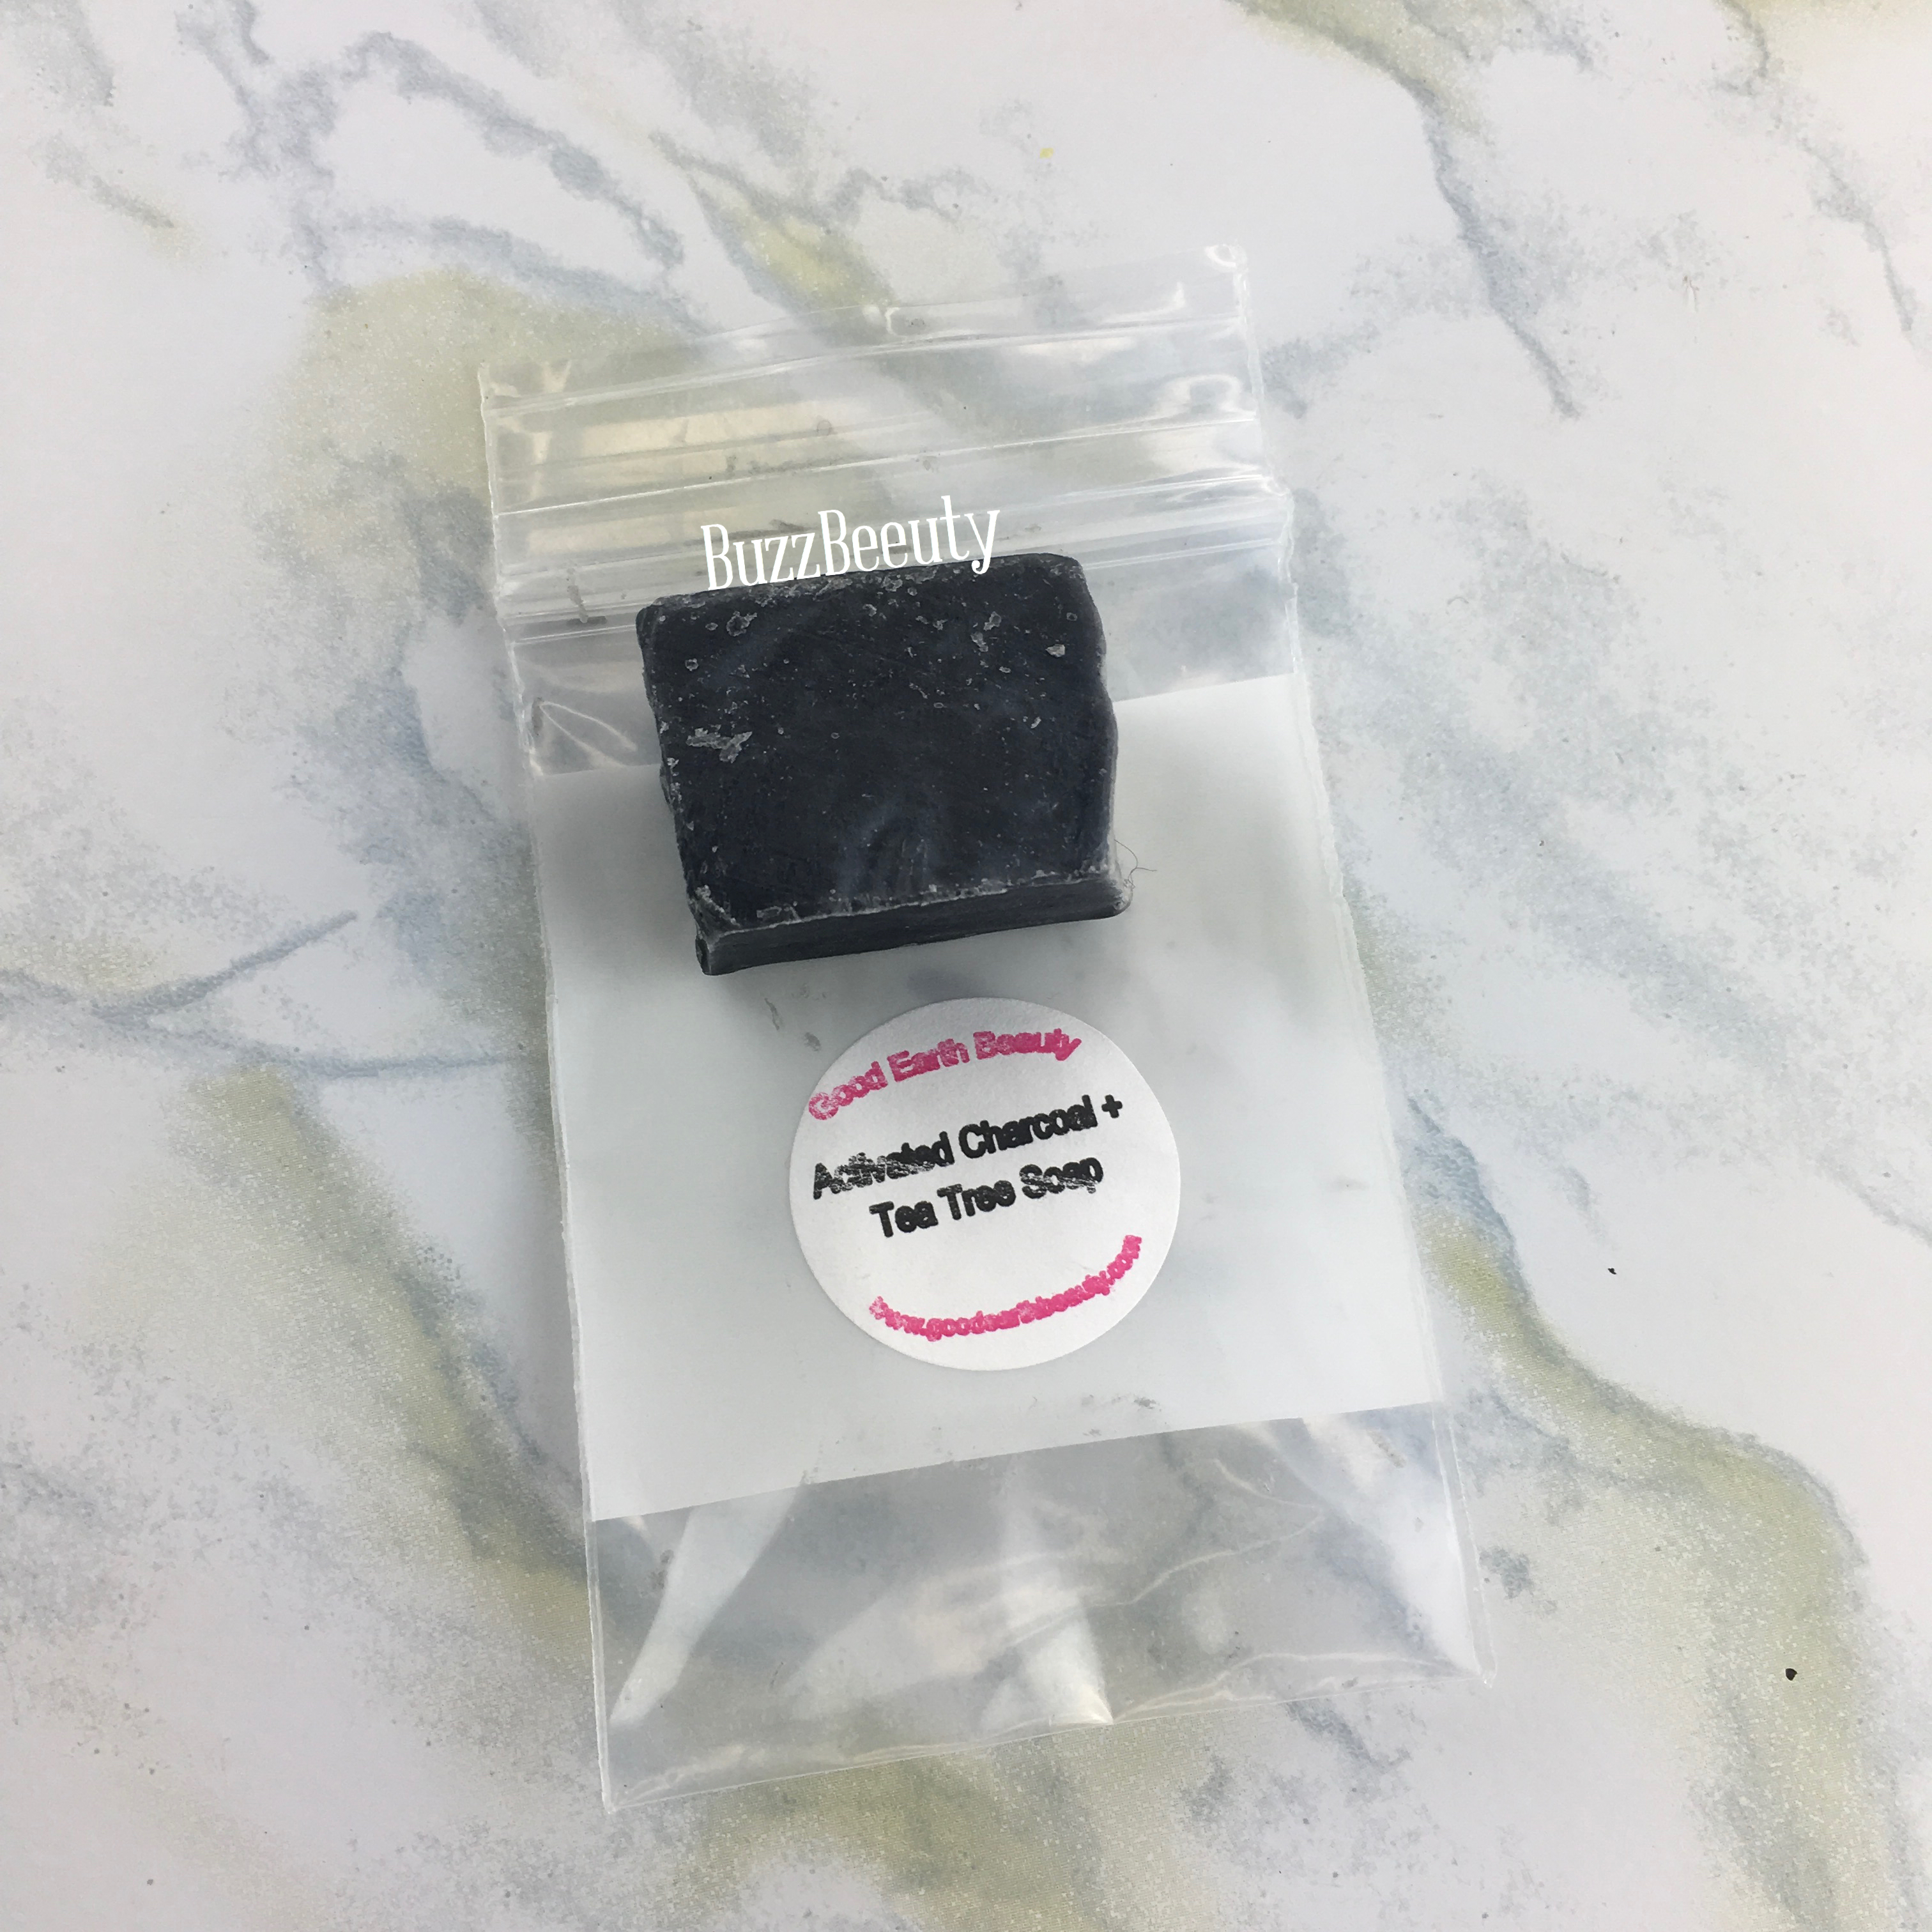 Good Earth Beauty Activated Charcoal and Tea Tree Facial and Body Soap Bar